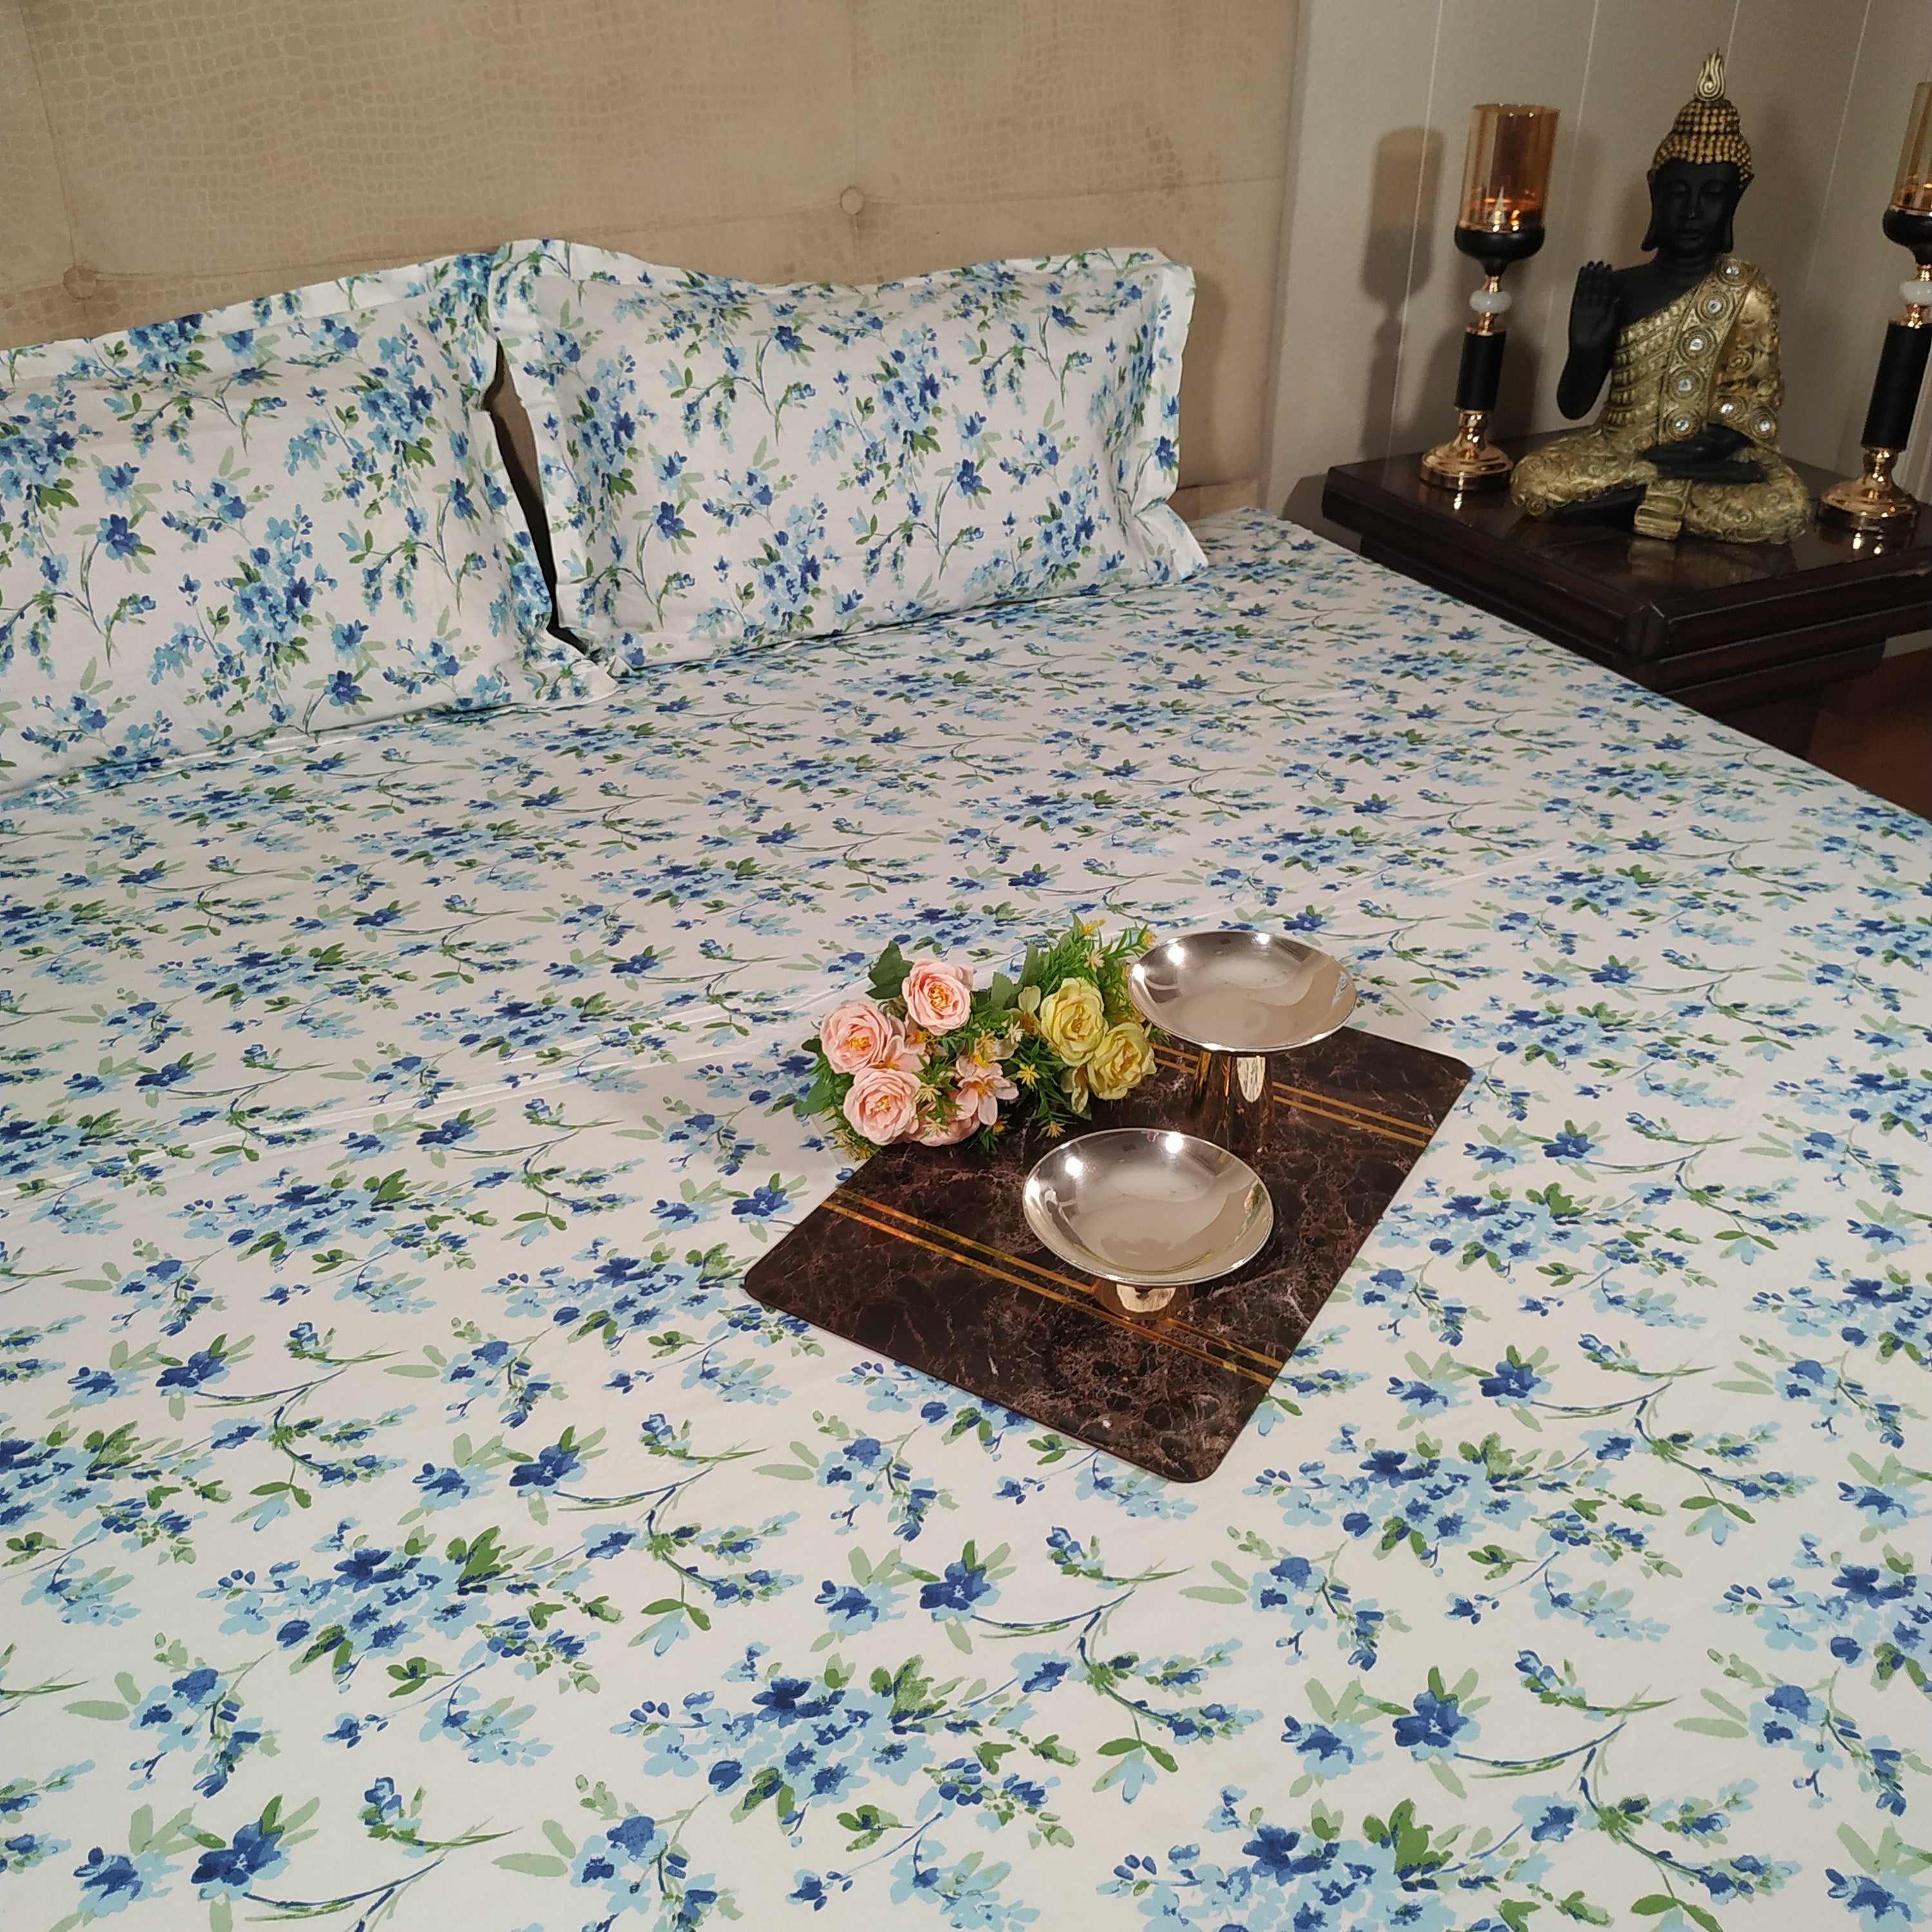 THE LUXELIFE COTTON PRINTED BEDSHEETS